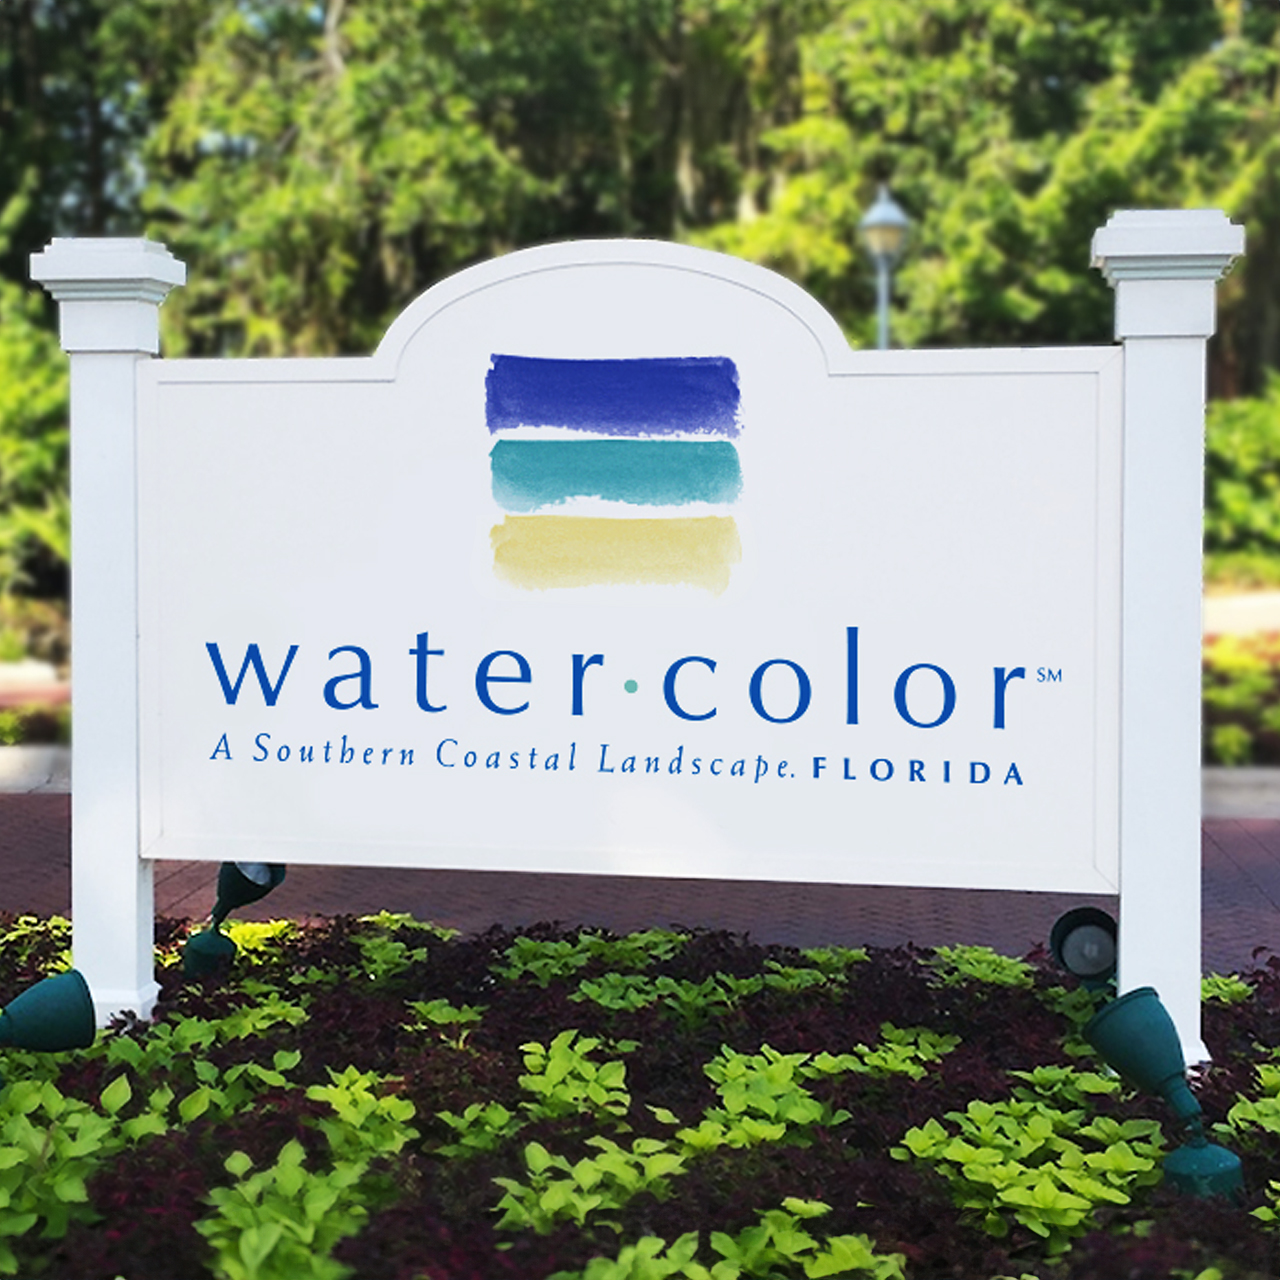 An image of a monument sign with the Water Color logo